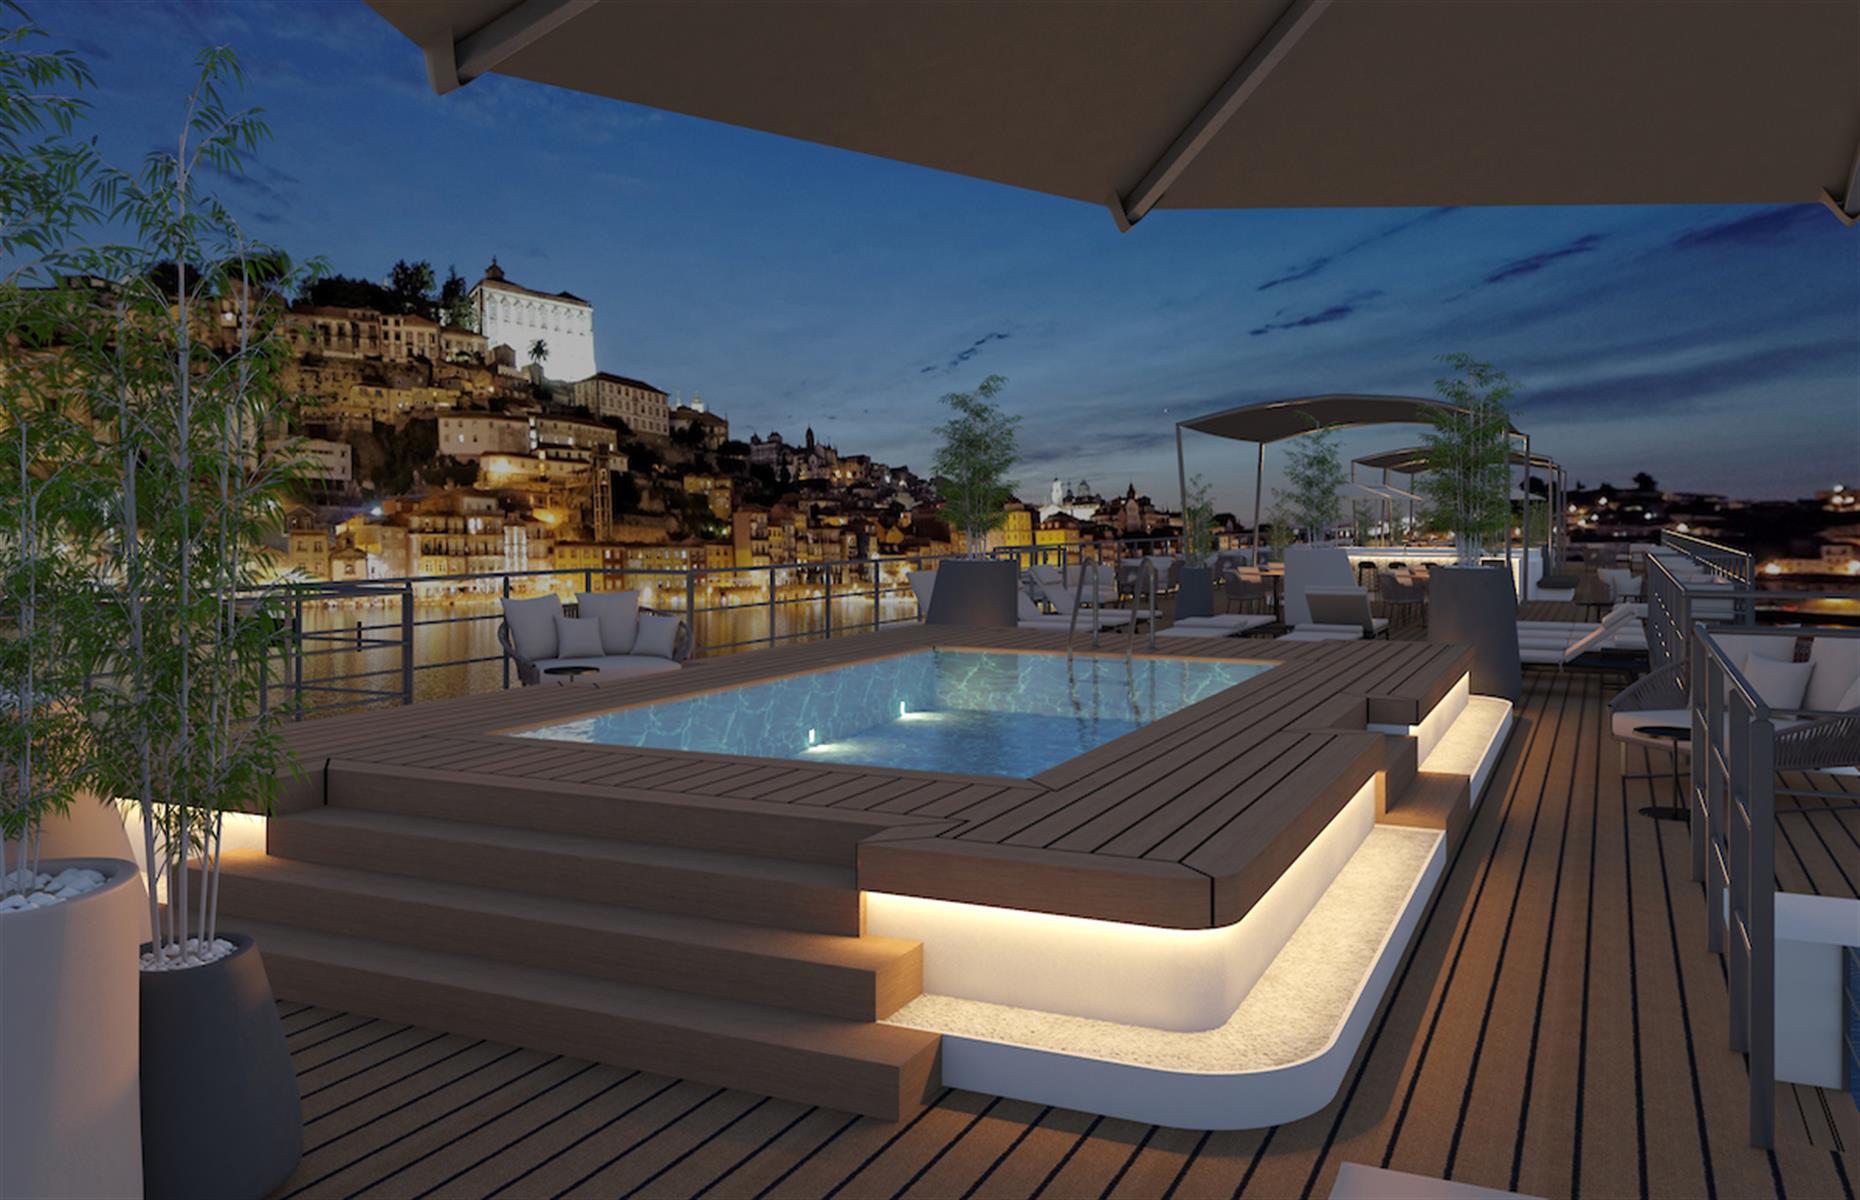 <p>Avalon Waterways' newest ship will have 37 Panorama Suites and 14 staterooms, but don't worry if you don't bag a suite – Avalon Alegria's staterooms will be 30% larger than the ones on other Avalon ships. The vessel has been designed to make the most of the views, with panoramic windows throughout and a sky-deck which includes its very own premium lounges. It's easy to stay connected, too – the ship will use Starlink for lightning-fast wifi. The best bit? It's included in the price. </p>